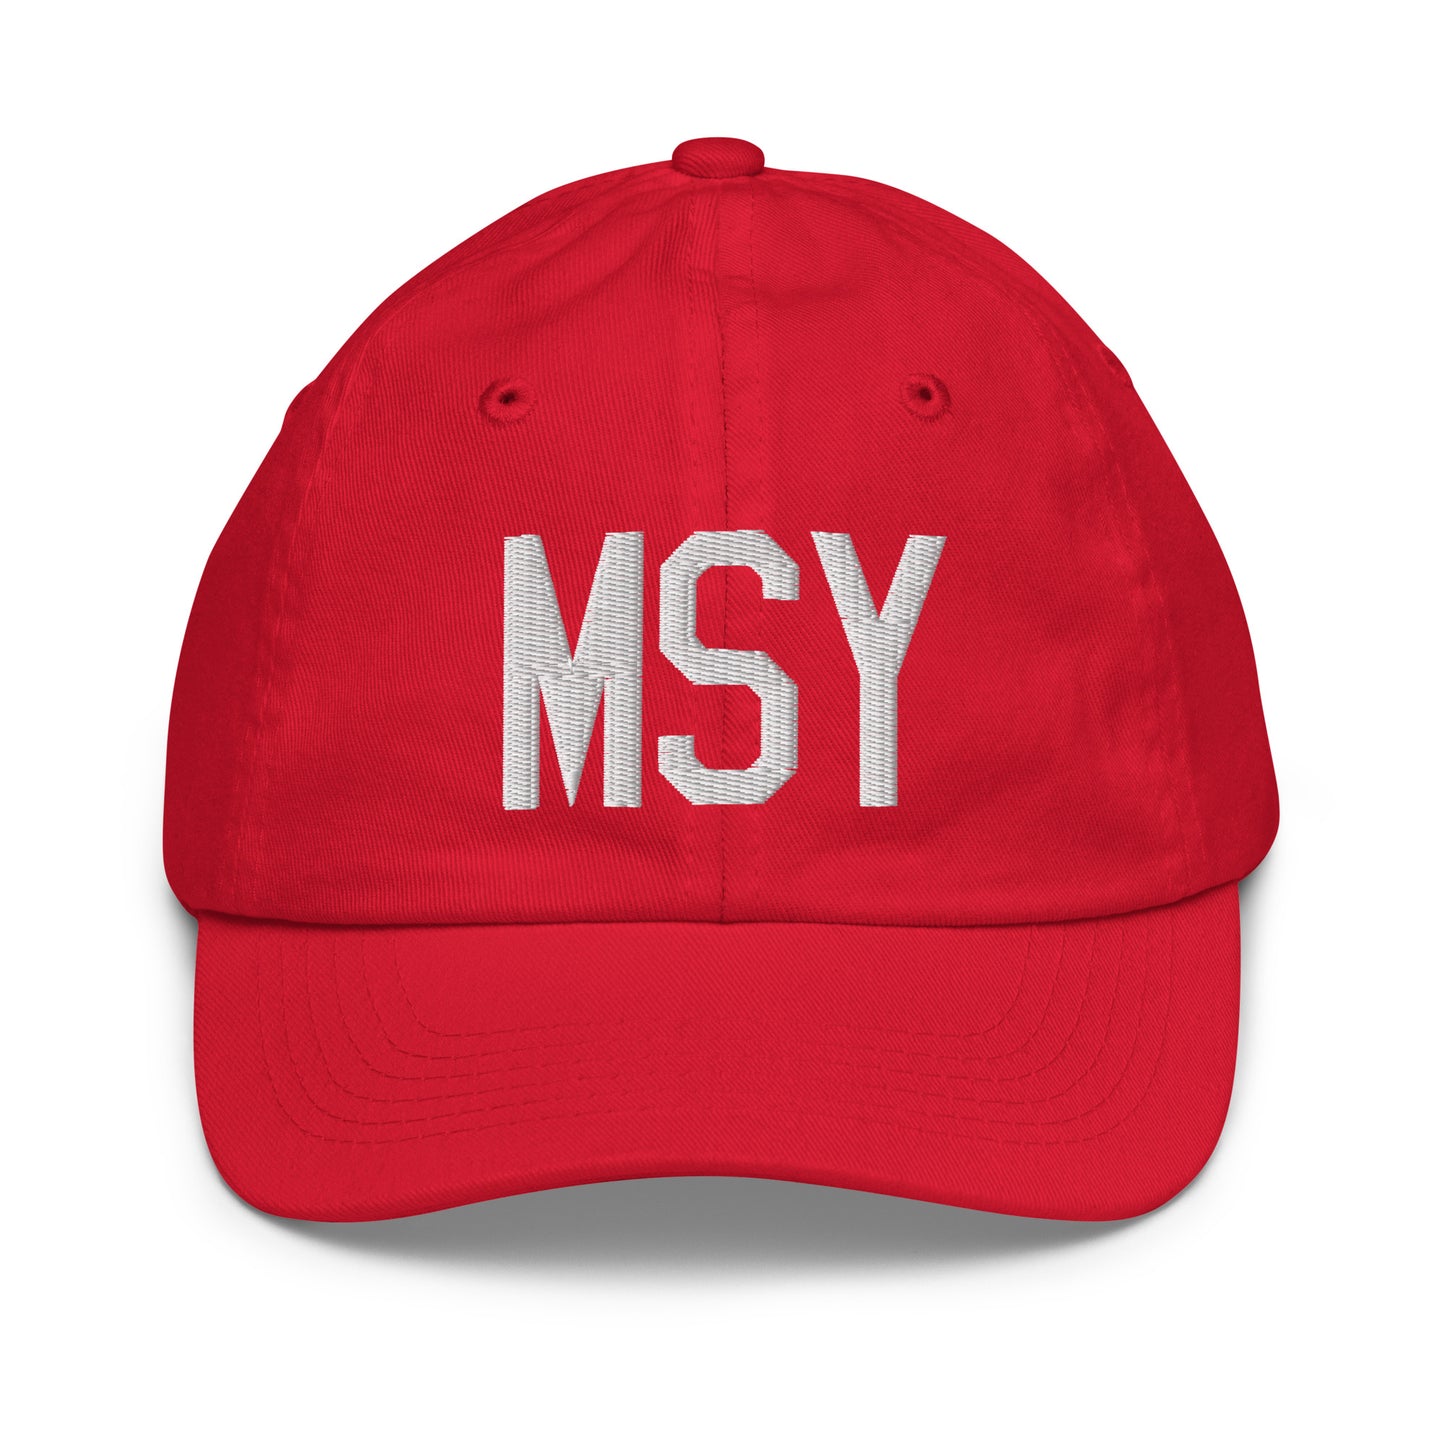 Airport Code Kid's Baseball Cap - White • MSY New Orleans • YHM Designs - Image 17